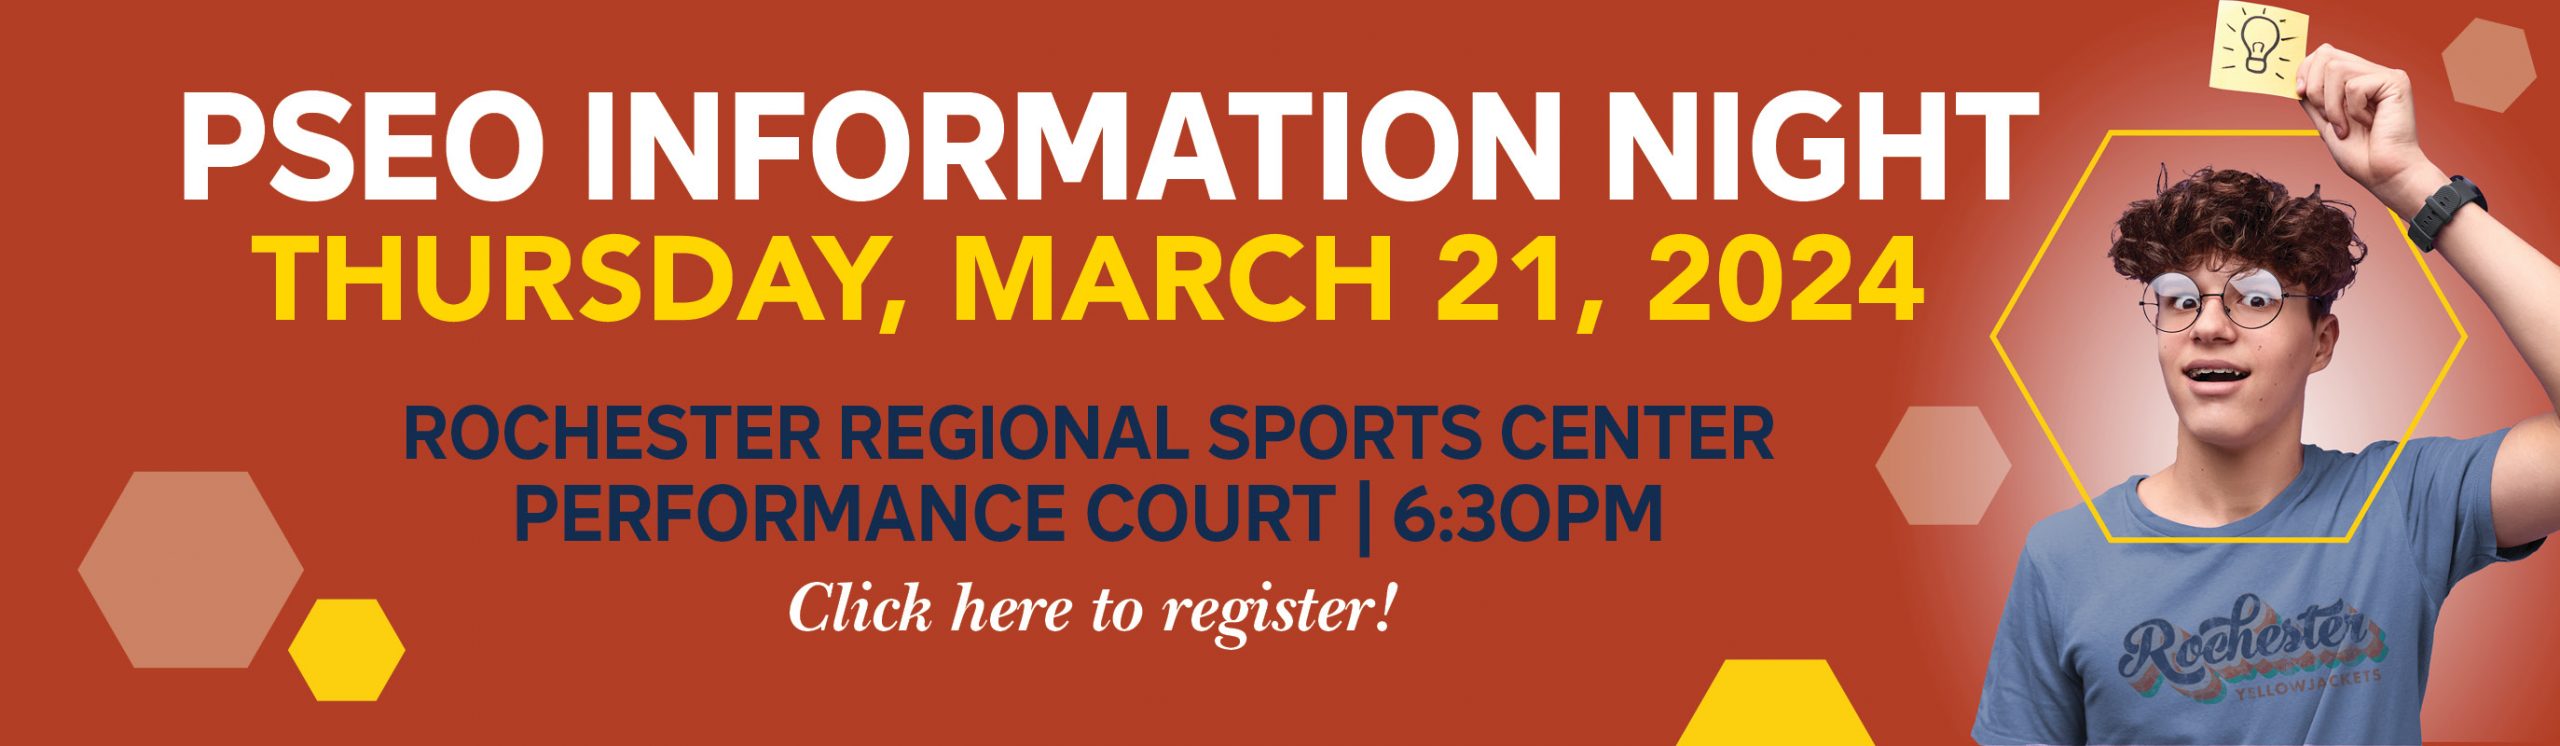 PSEO Information Night is March 21, 2024